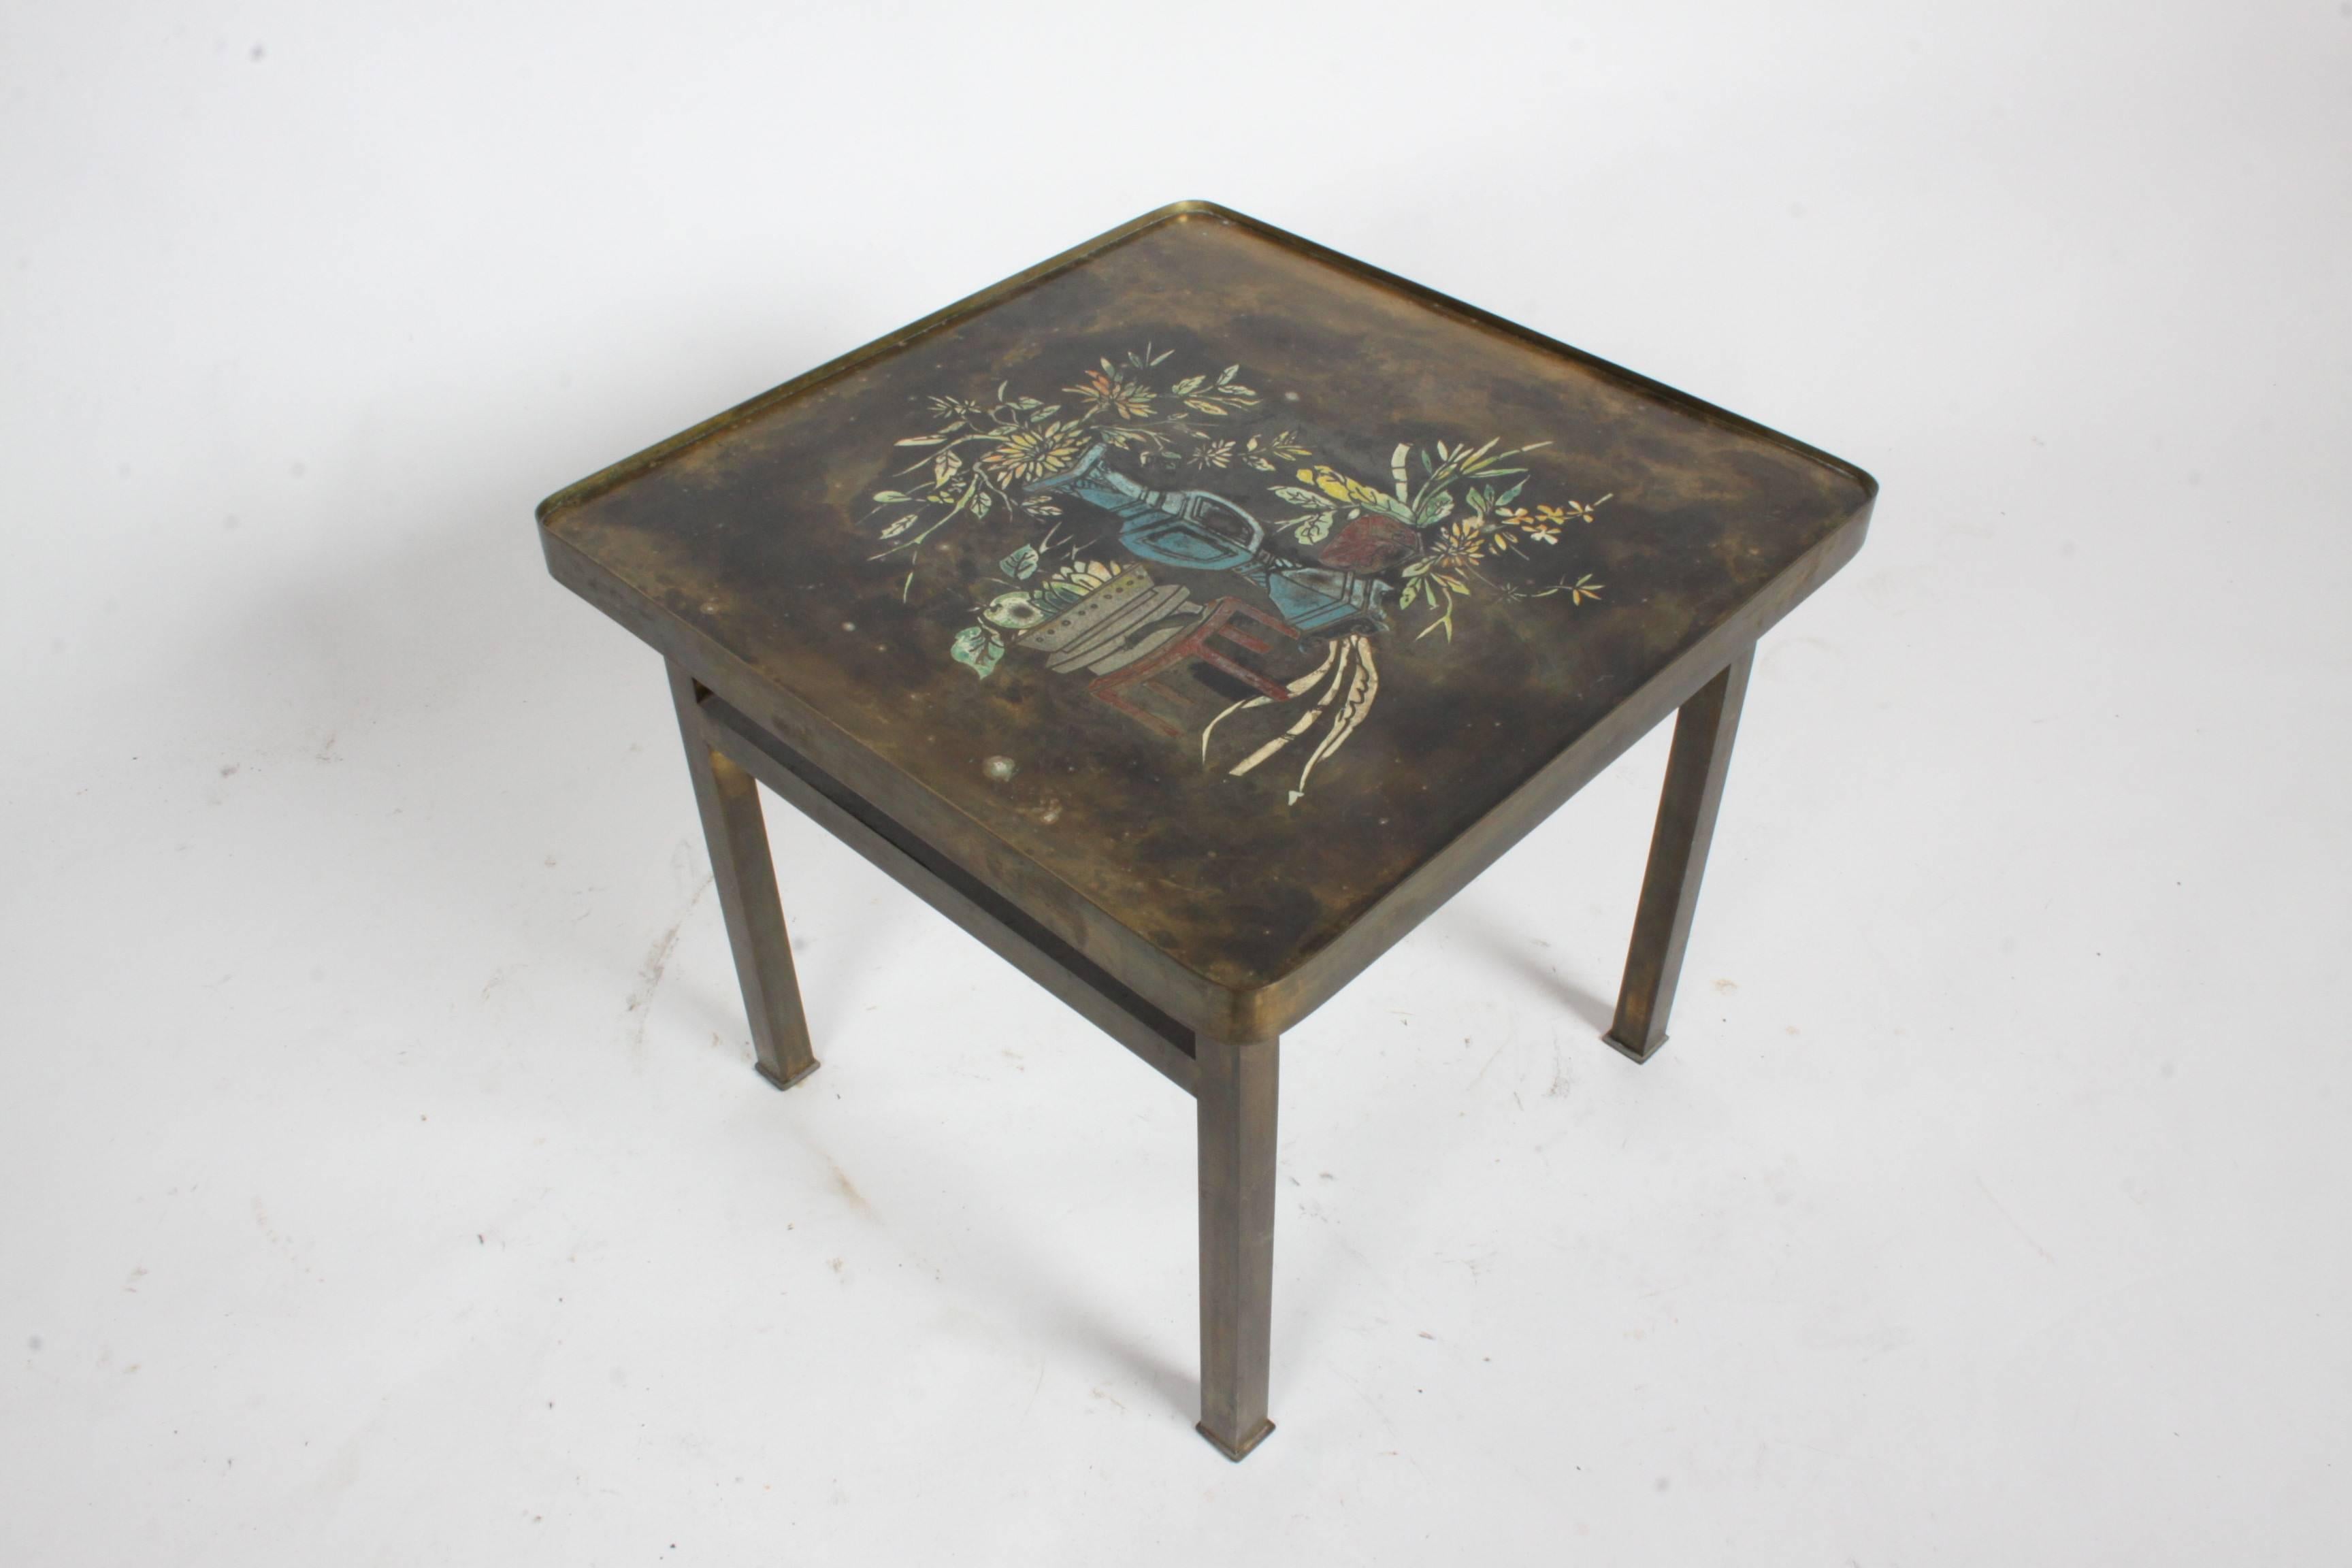 Philip and Kelvin LaVerne bronze and enamel side table, titled Kang design. Overall nice original condition with patina. Signed P.K. LaVerne.